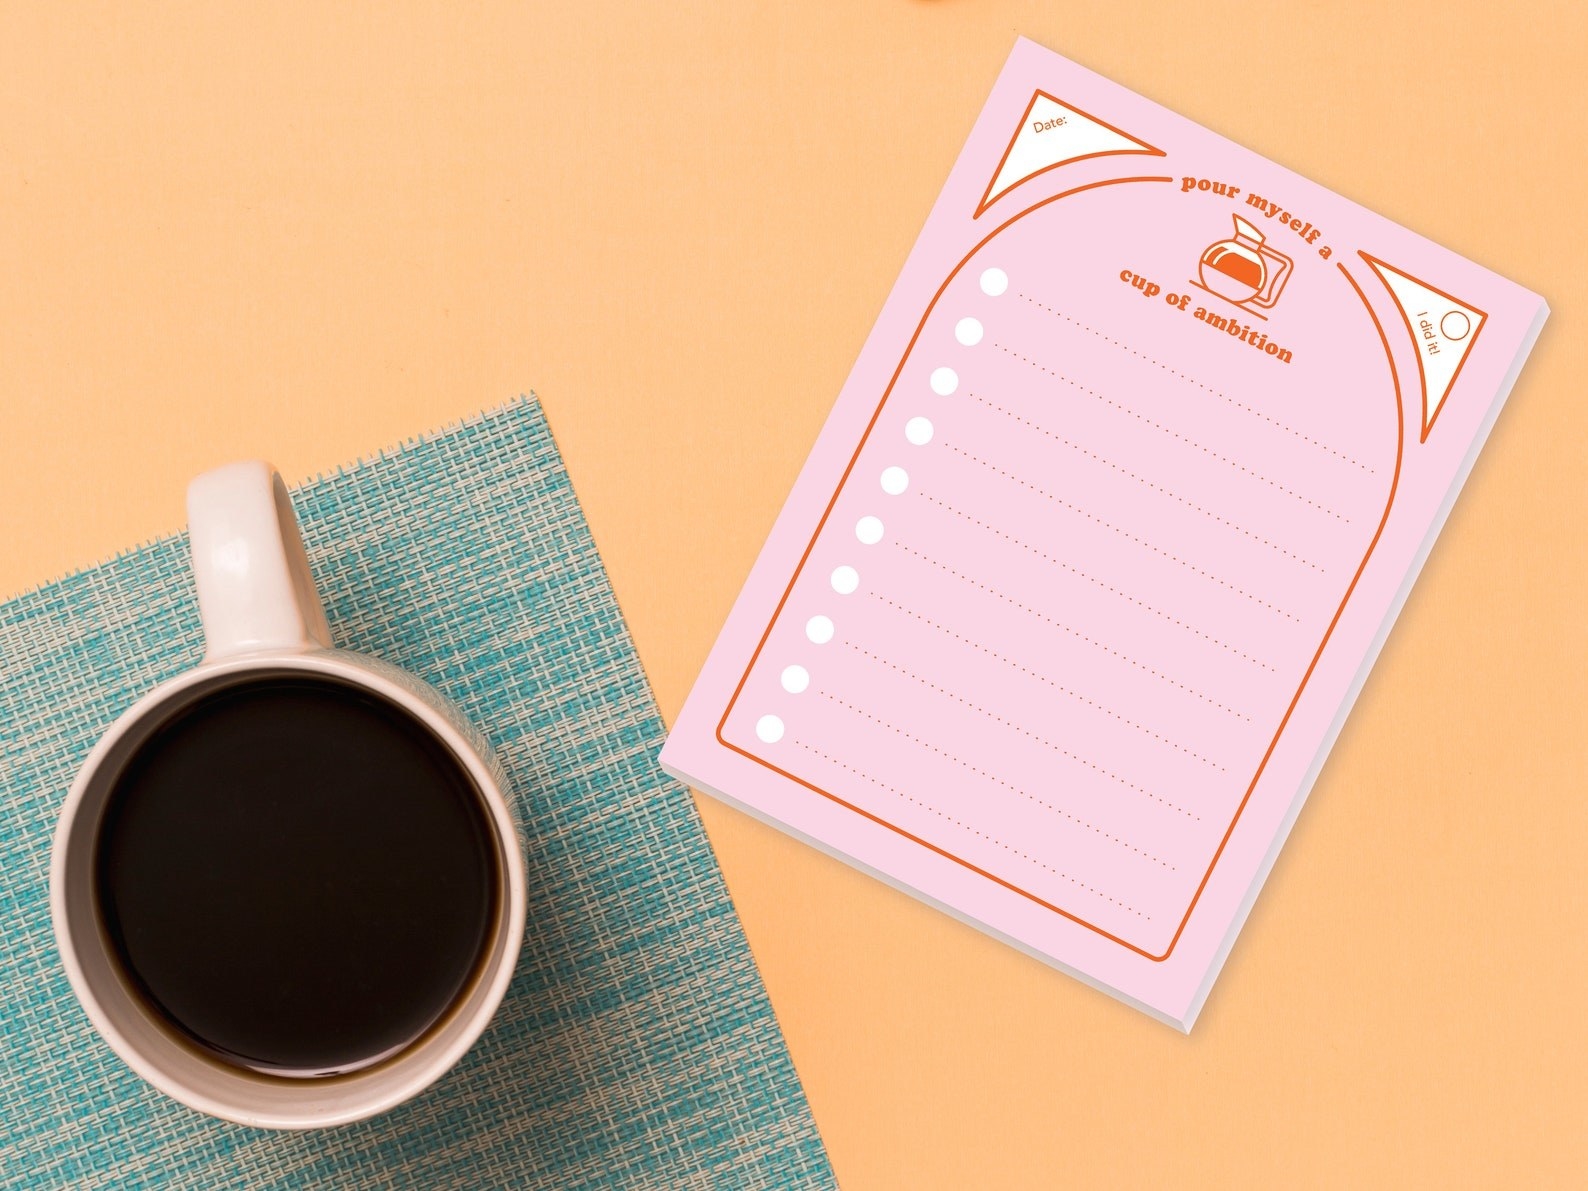 The pink notepad with a coffee pot icon and 